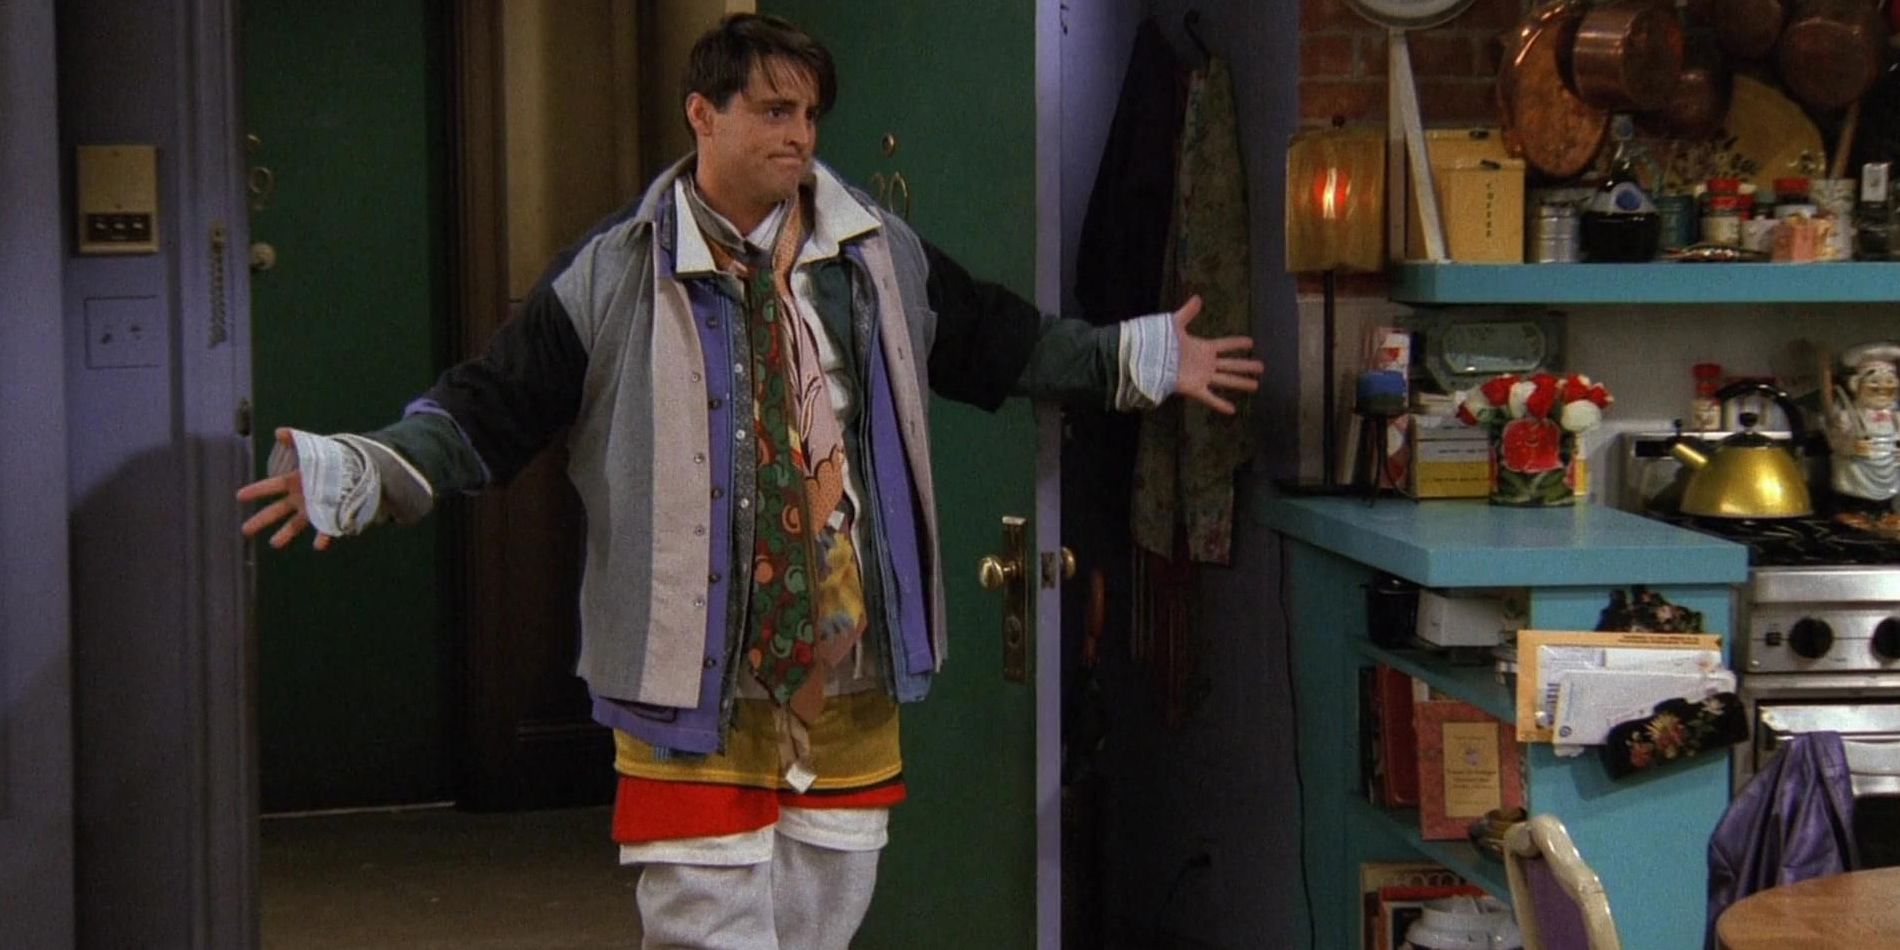 Joey wearing all of Chandler's clothes